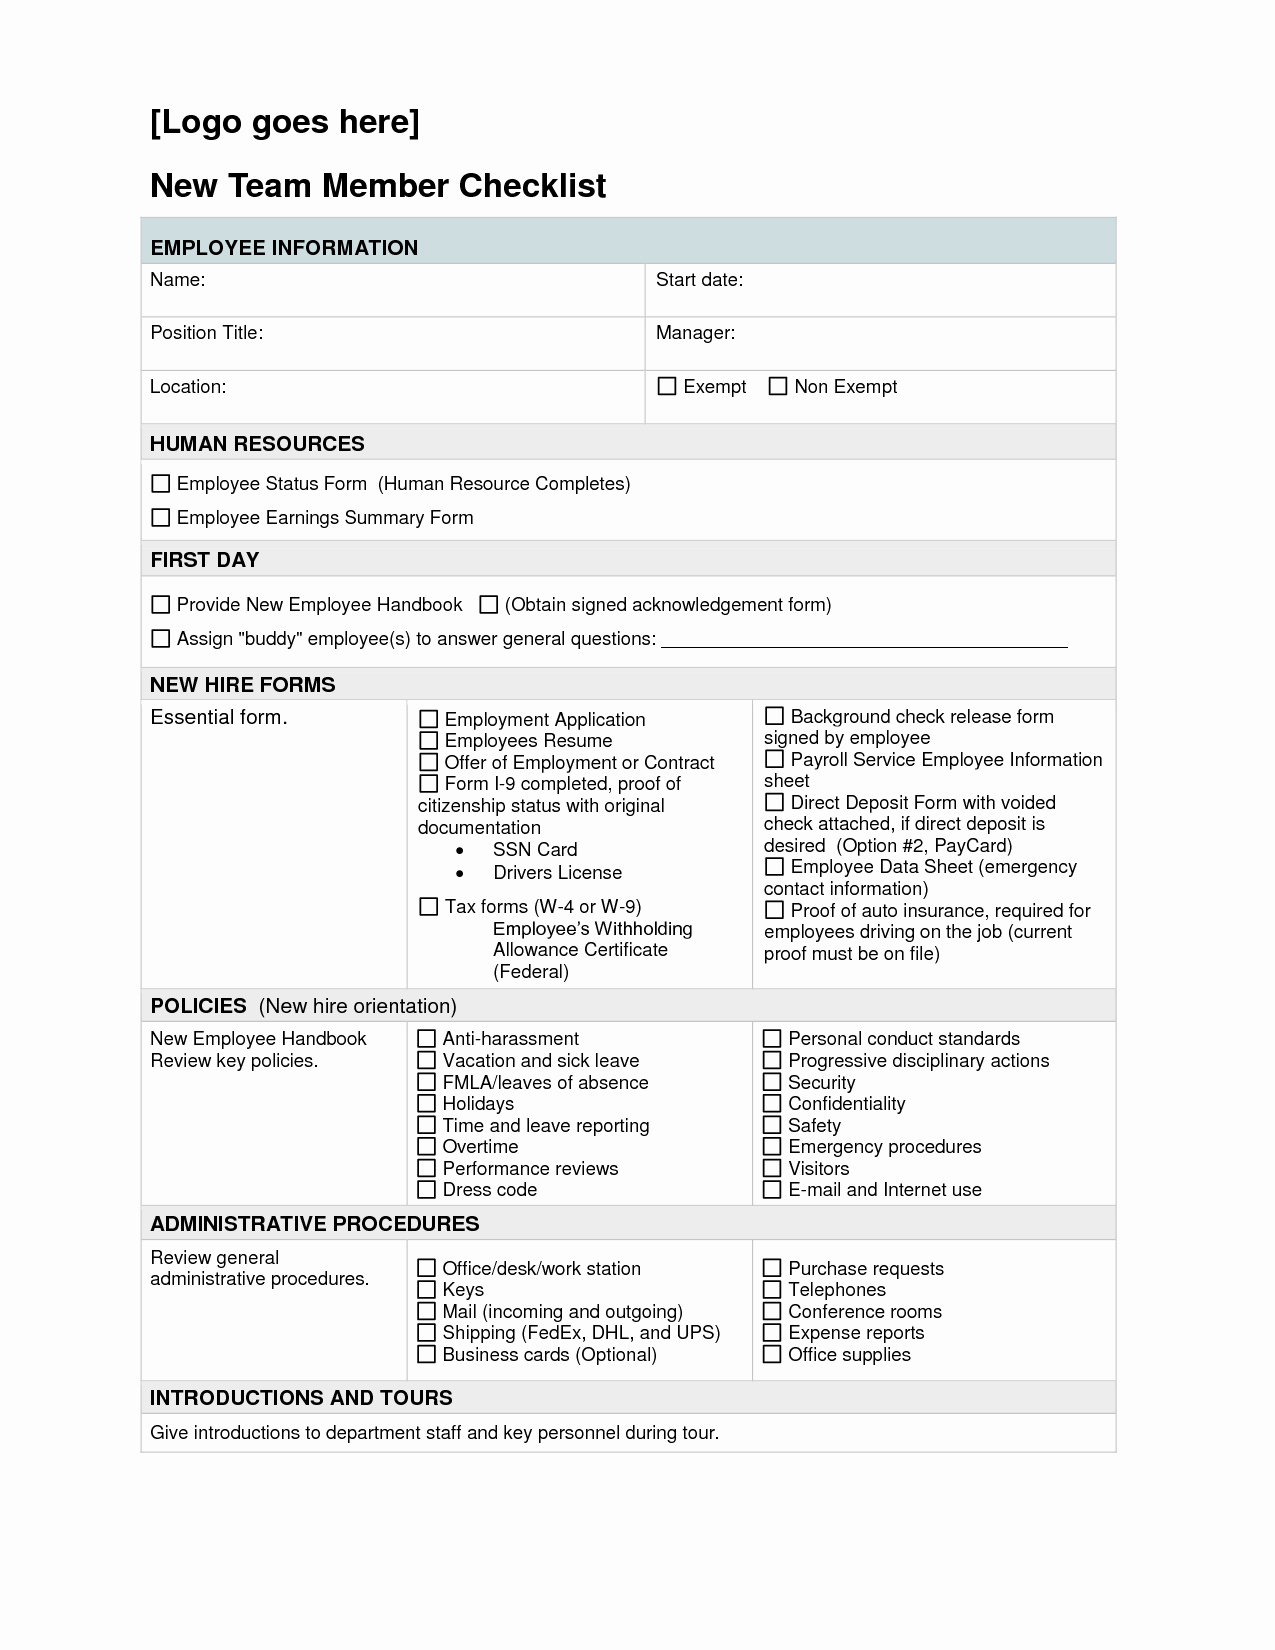 New Hire Checklist Excel Luxury New Hire Checklist Full Version Employee forms